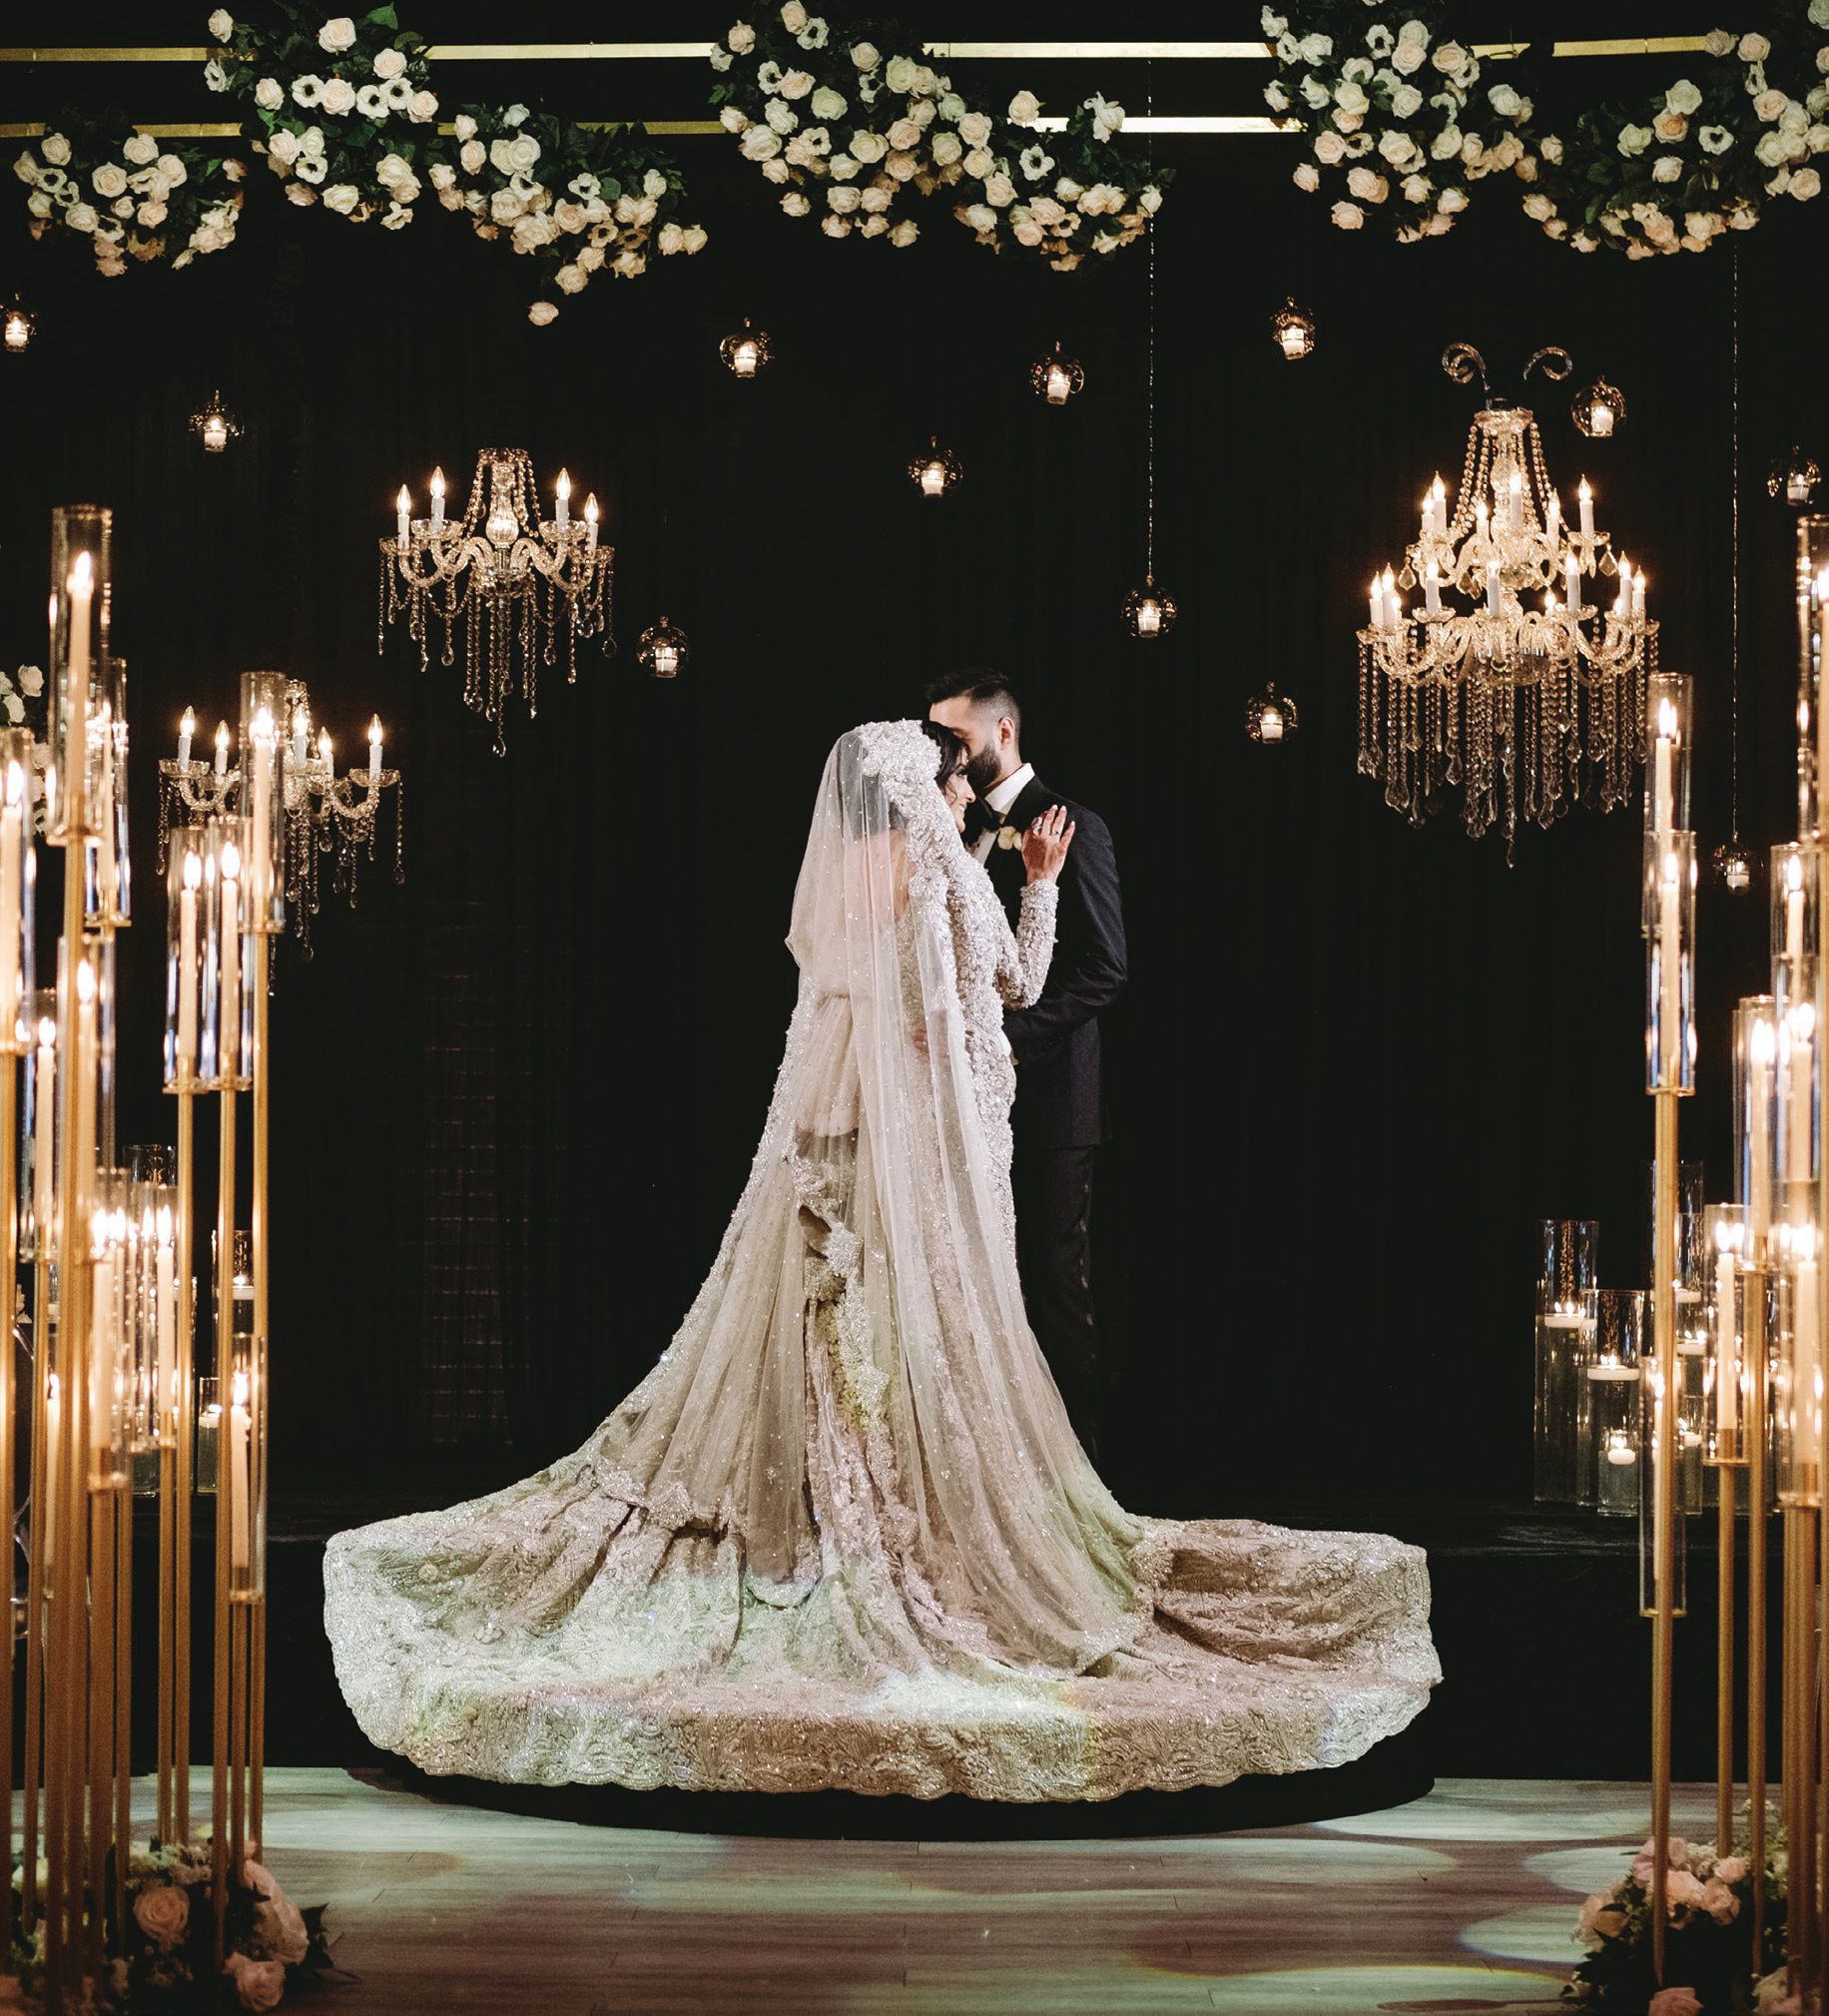 Chandeliers seemed to float in midair against black draping. Photographed by Zandbox Photo